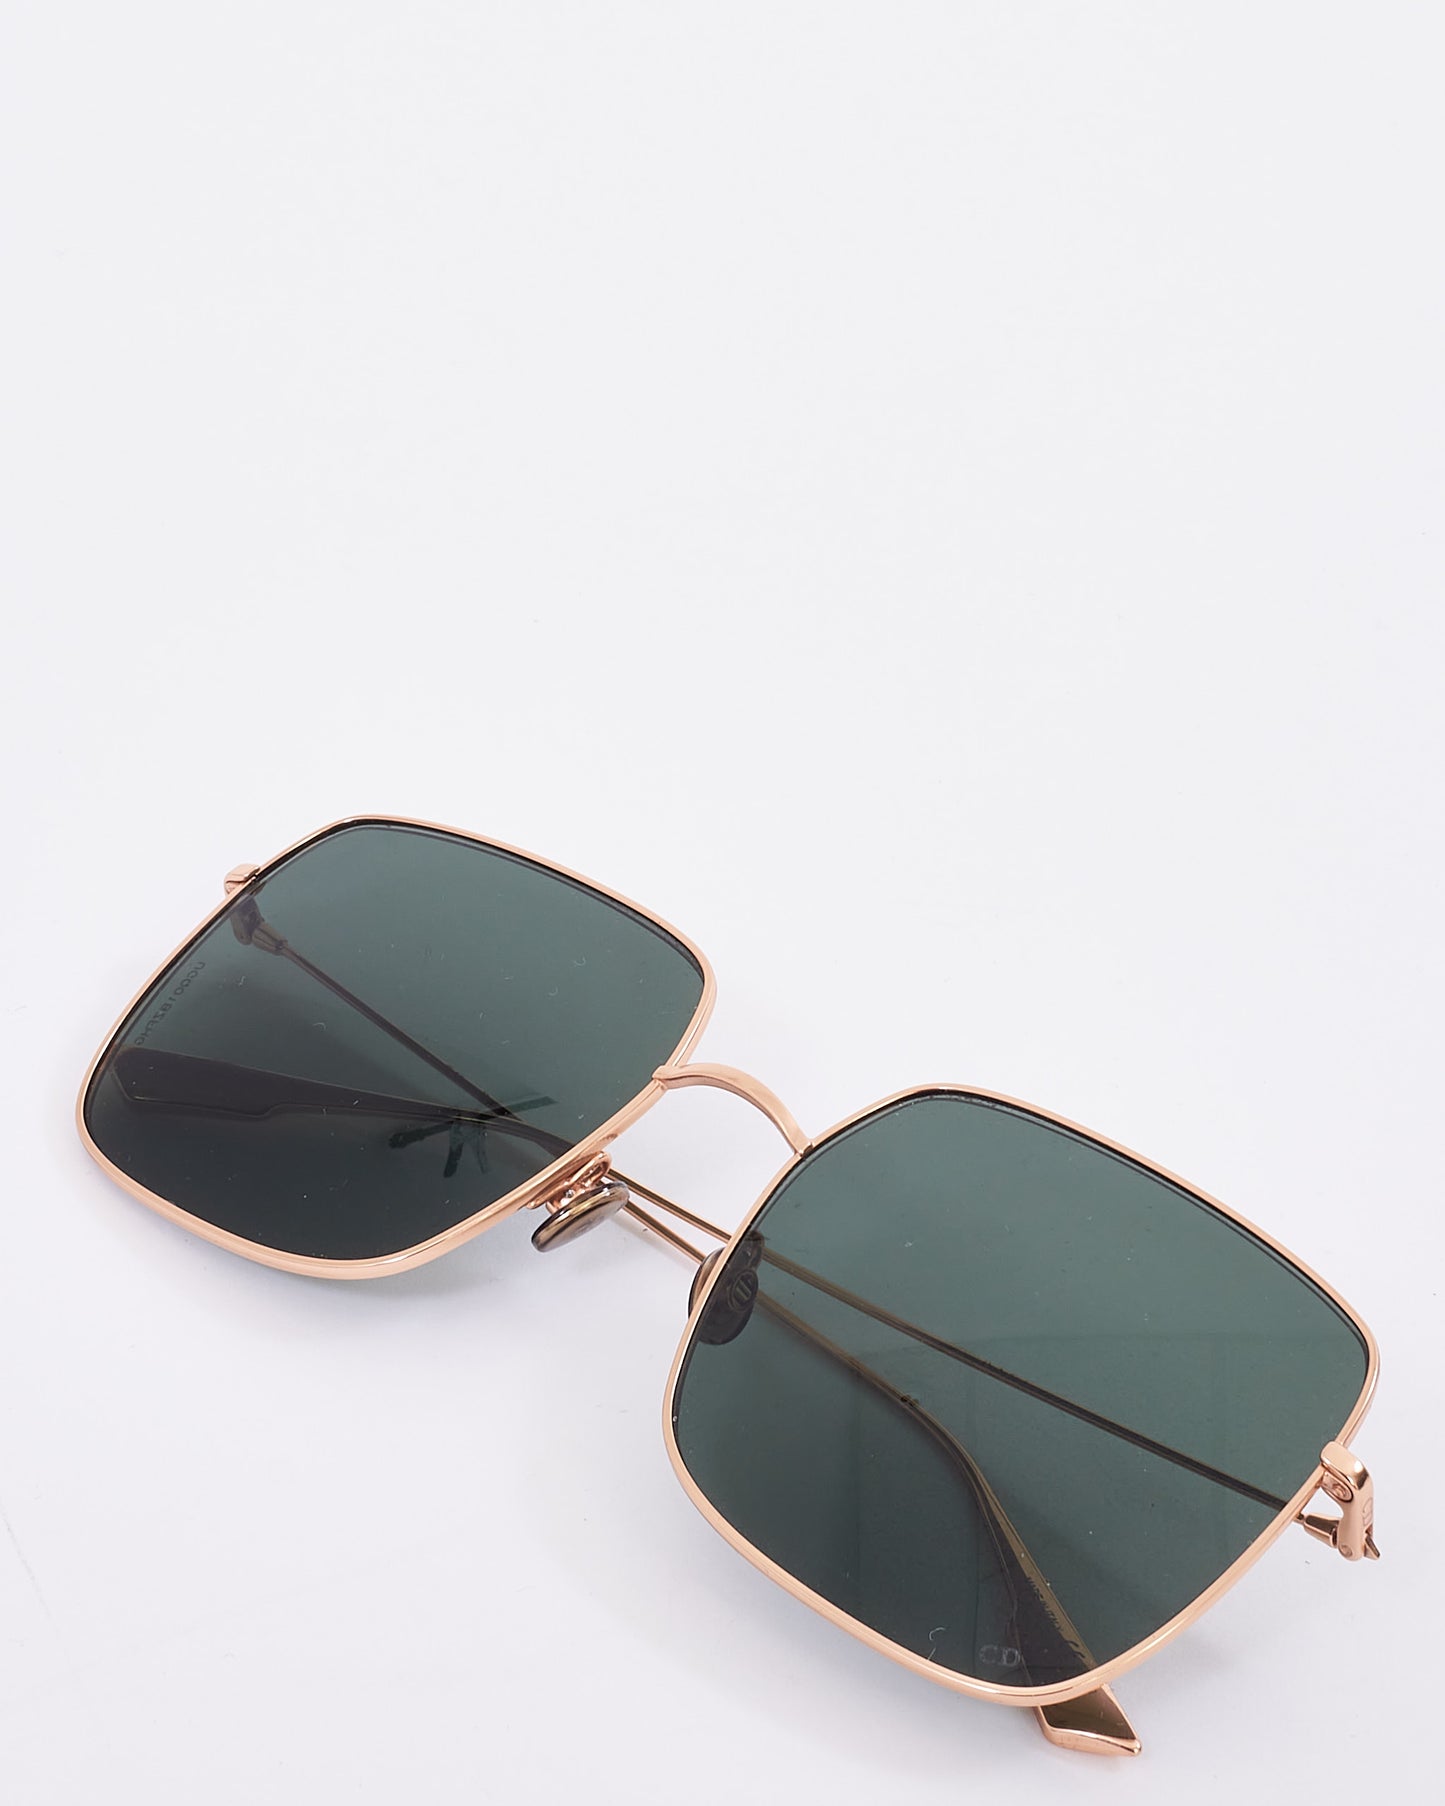 Dior Gold Metal with Green Lens DDBO7 Square Sunglasses